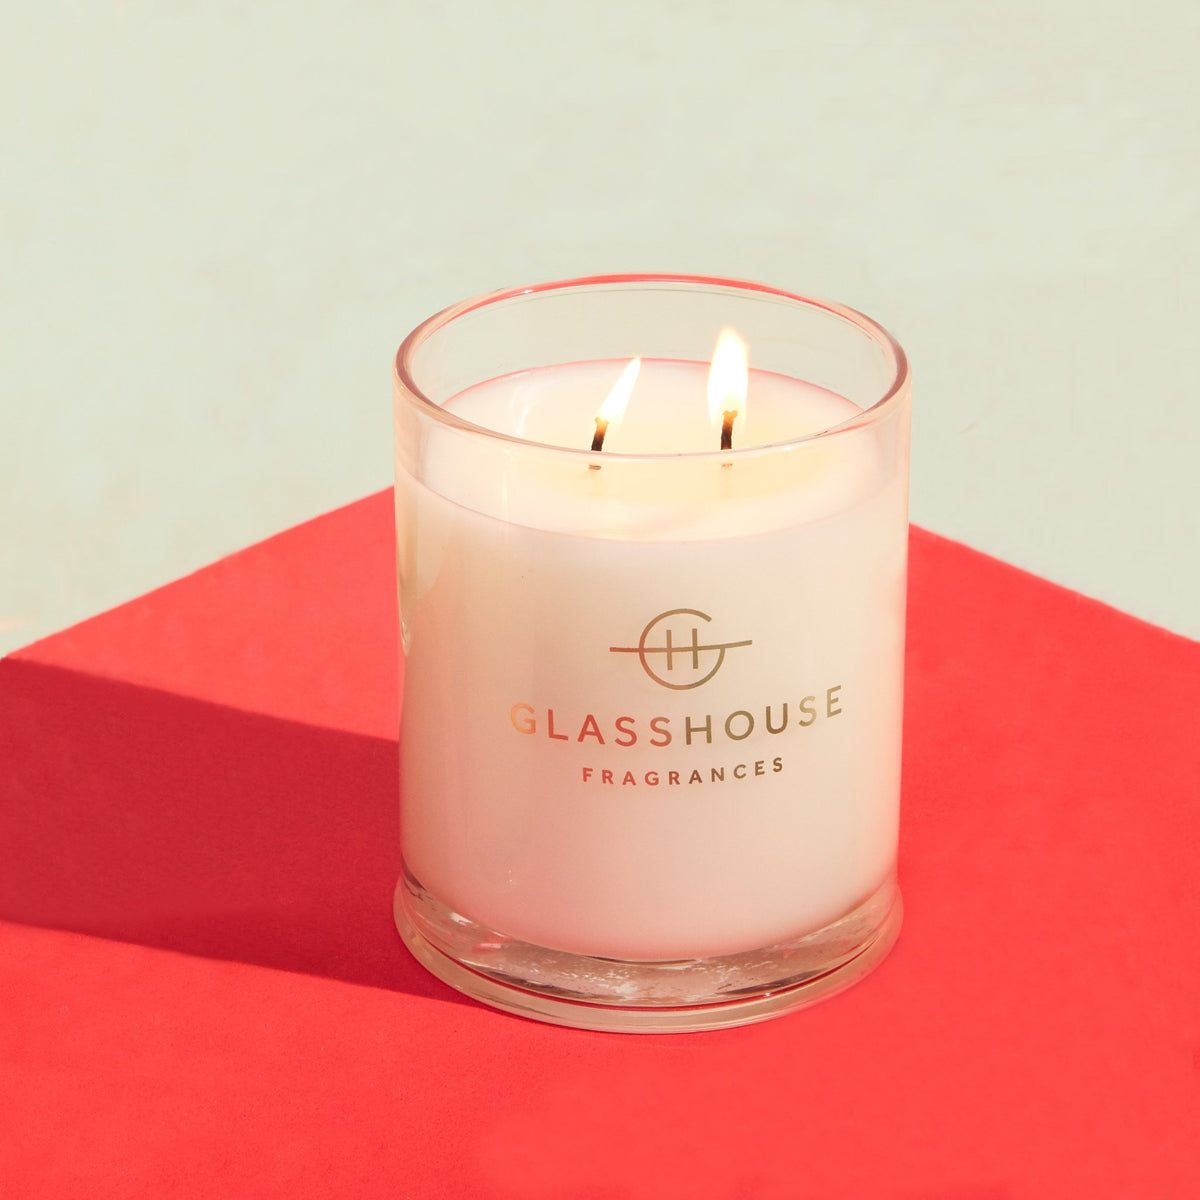 Glasshouse Fragrances Kyoto In Bloom | Camellia &amp; Lotus Candle 380g